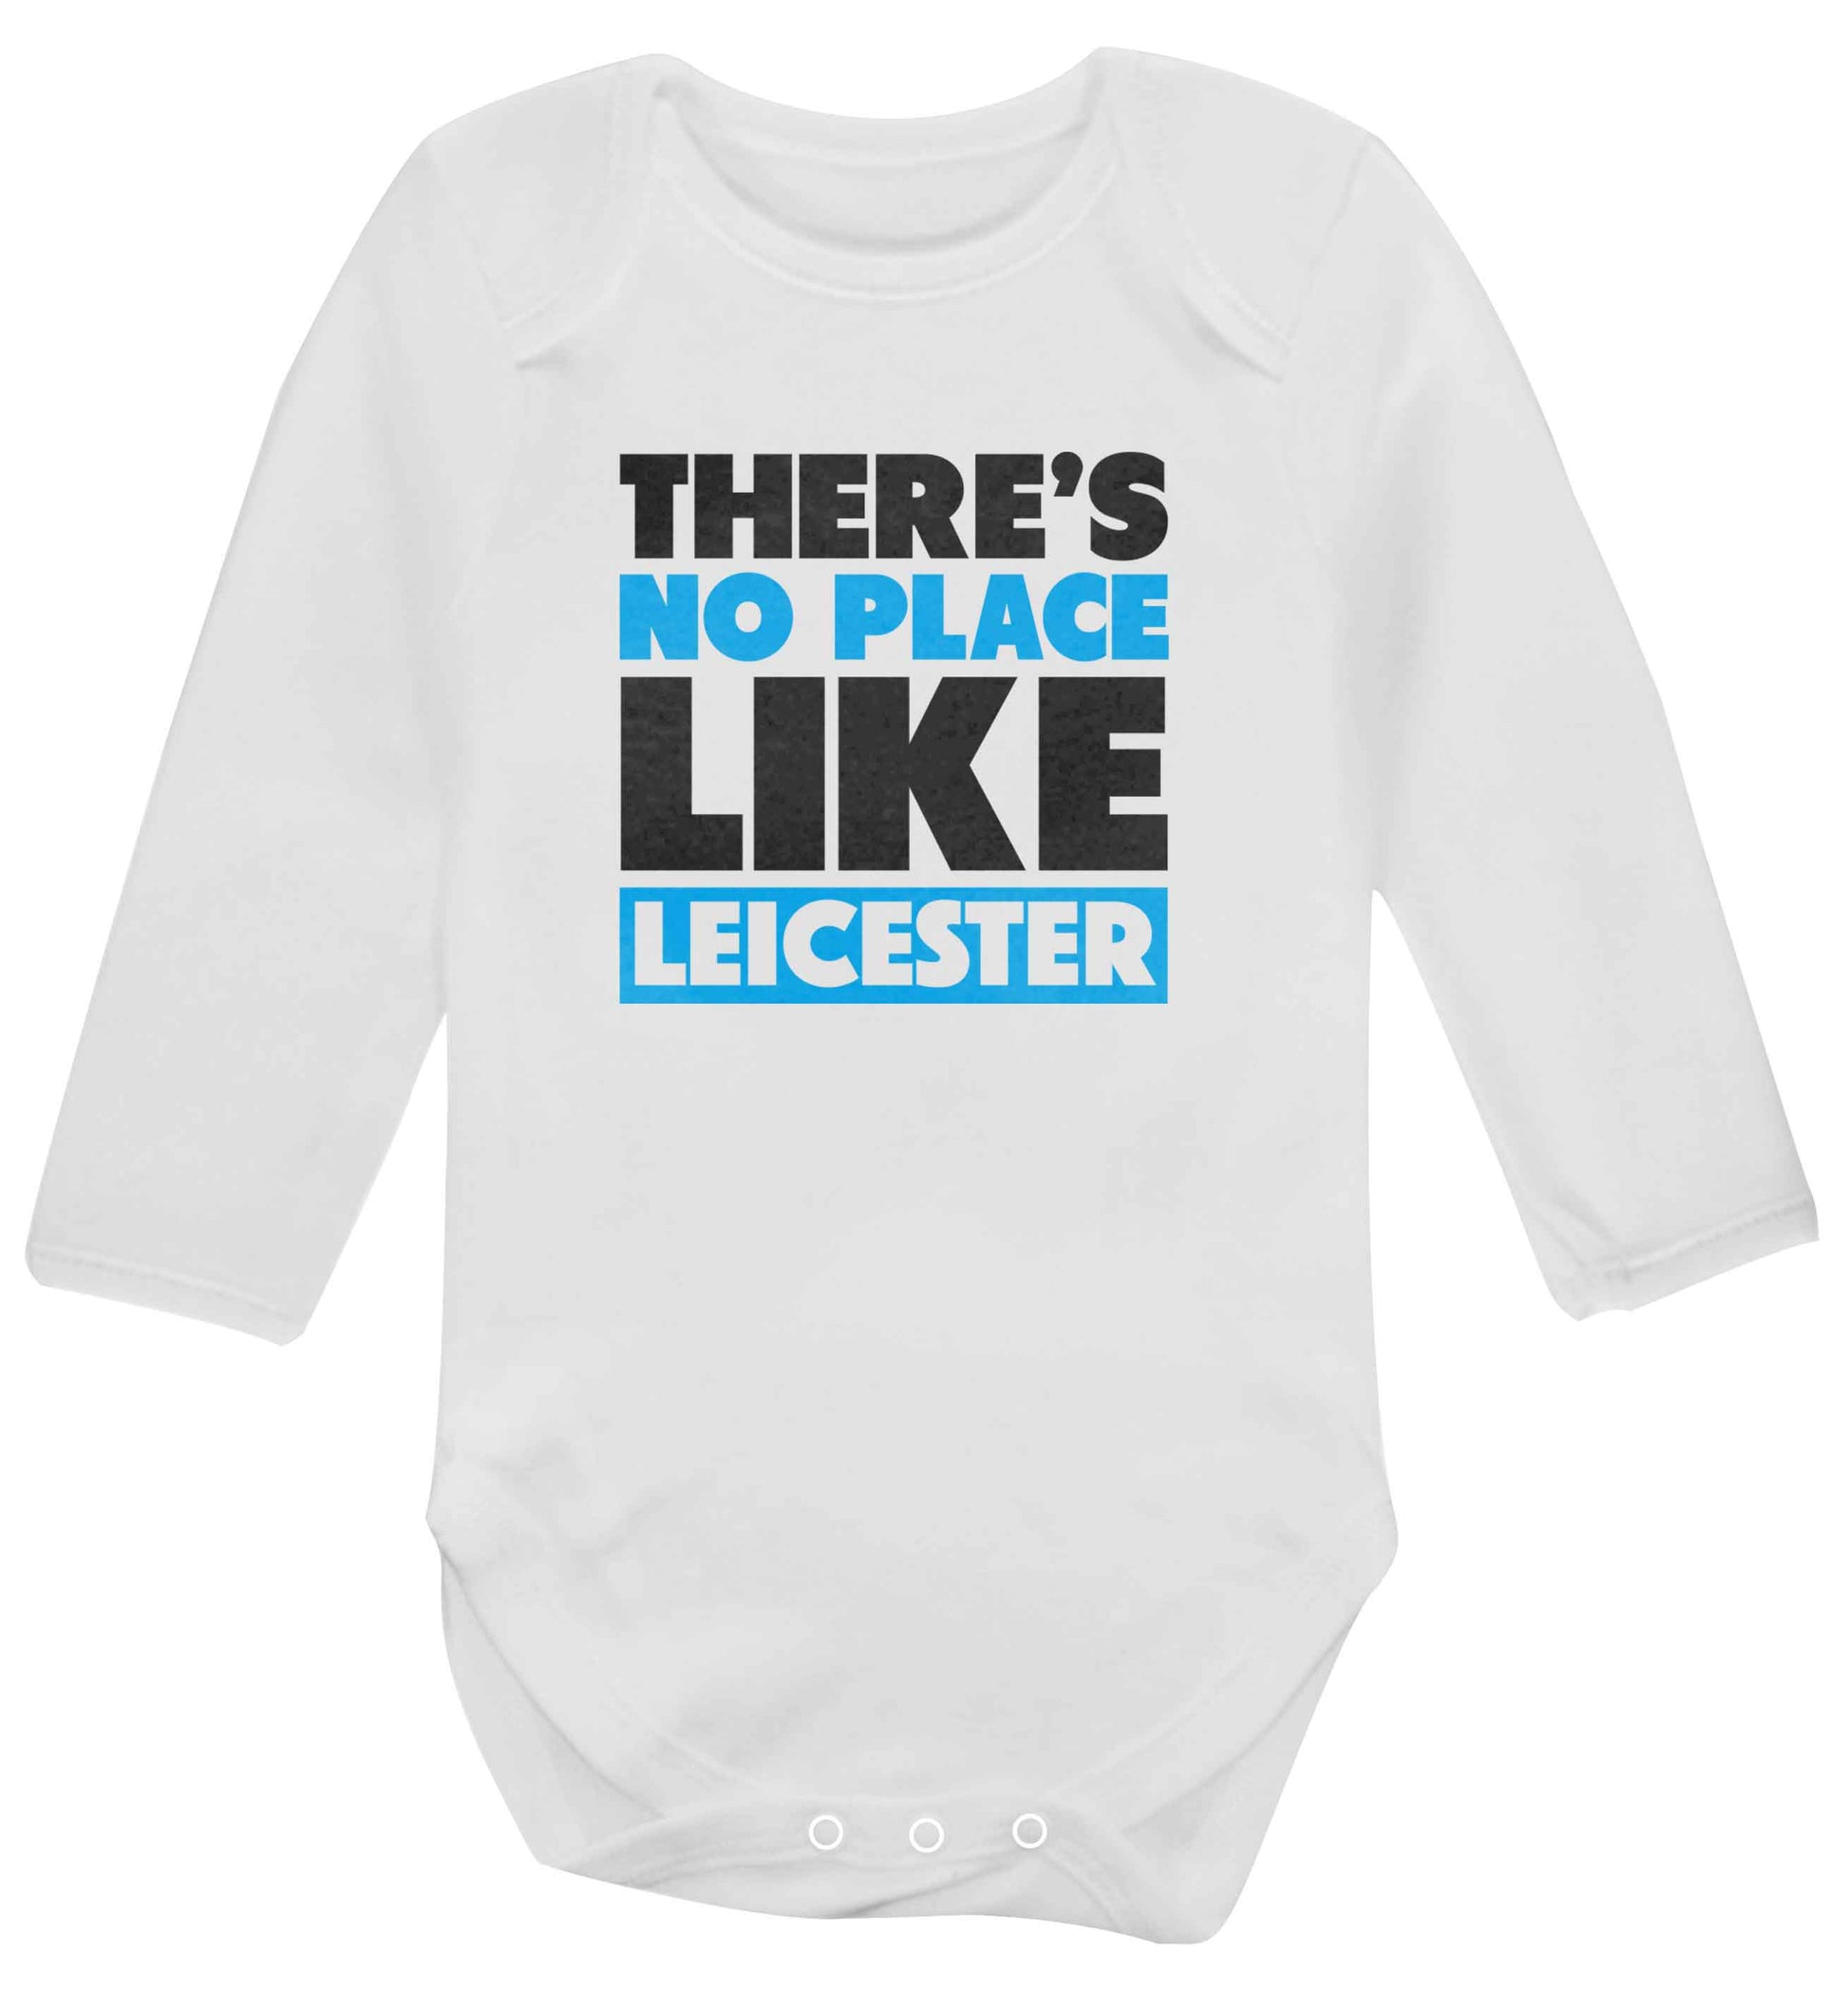 There's no place like Leicester baby vest long sleeved white 6-12 months